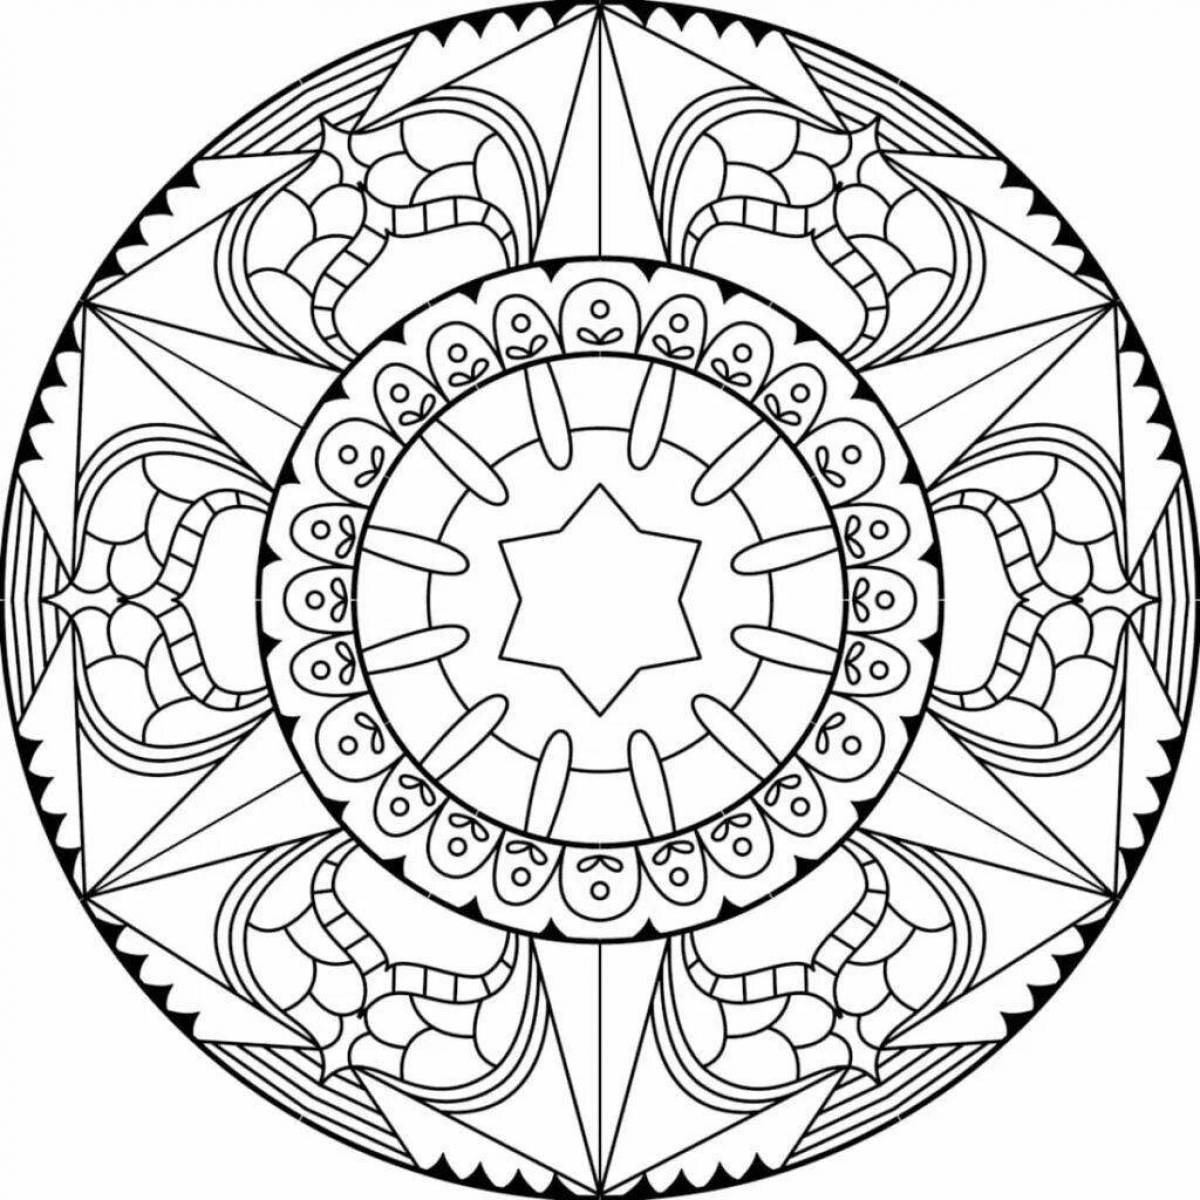 Awesome coloring mandala of wealth and prosperity